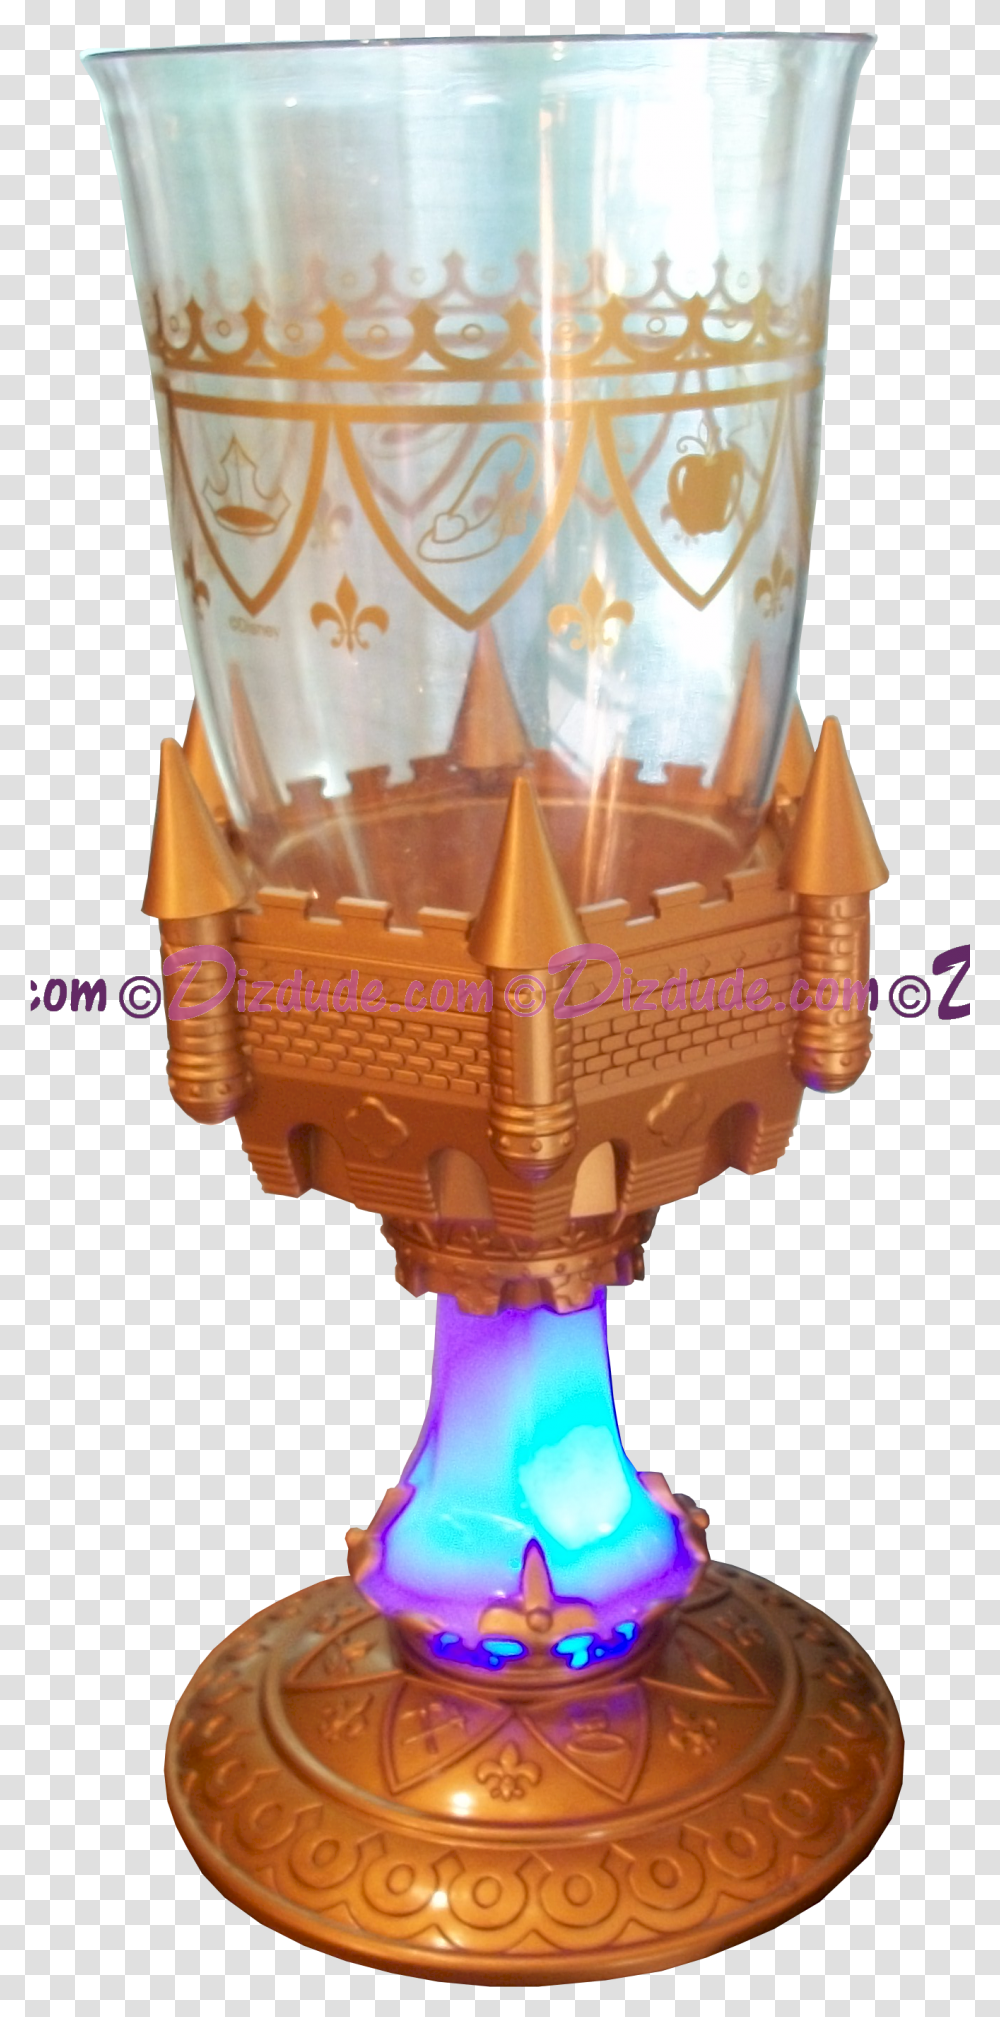 New Fantasyland Light Up Souvenir Glass Our Guest Restaurant Cup, Toy, Spire, Tower, Architecture Transparent Png